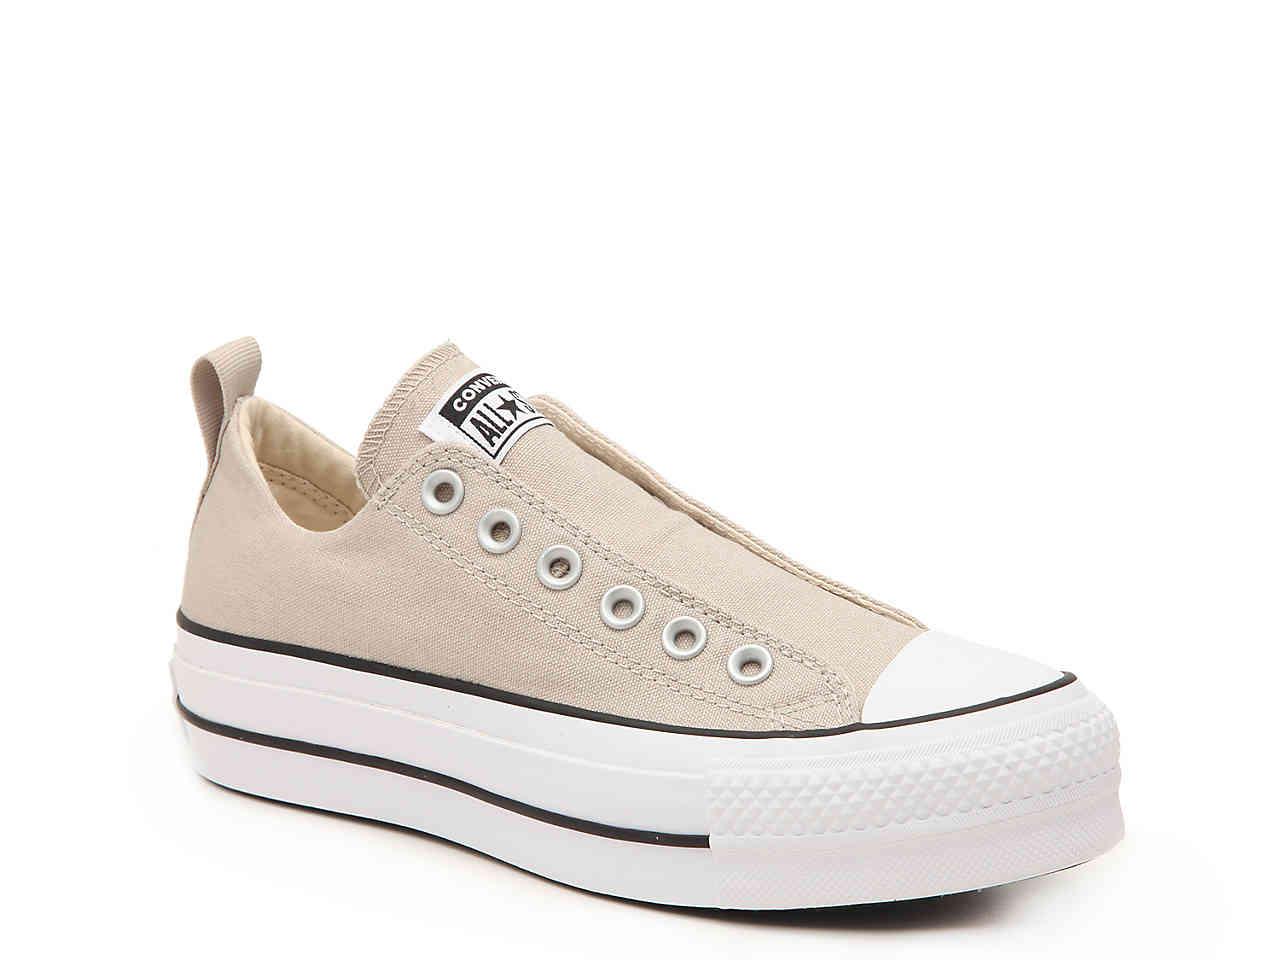 Converse Chuck Taylor All Star Fashion Lift Platform Slip-on Sneaker in Natural |